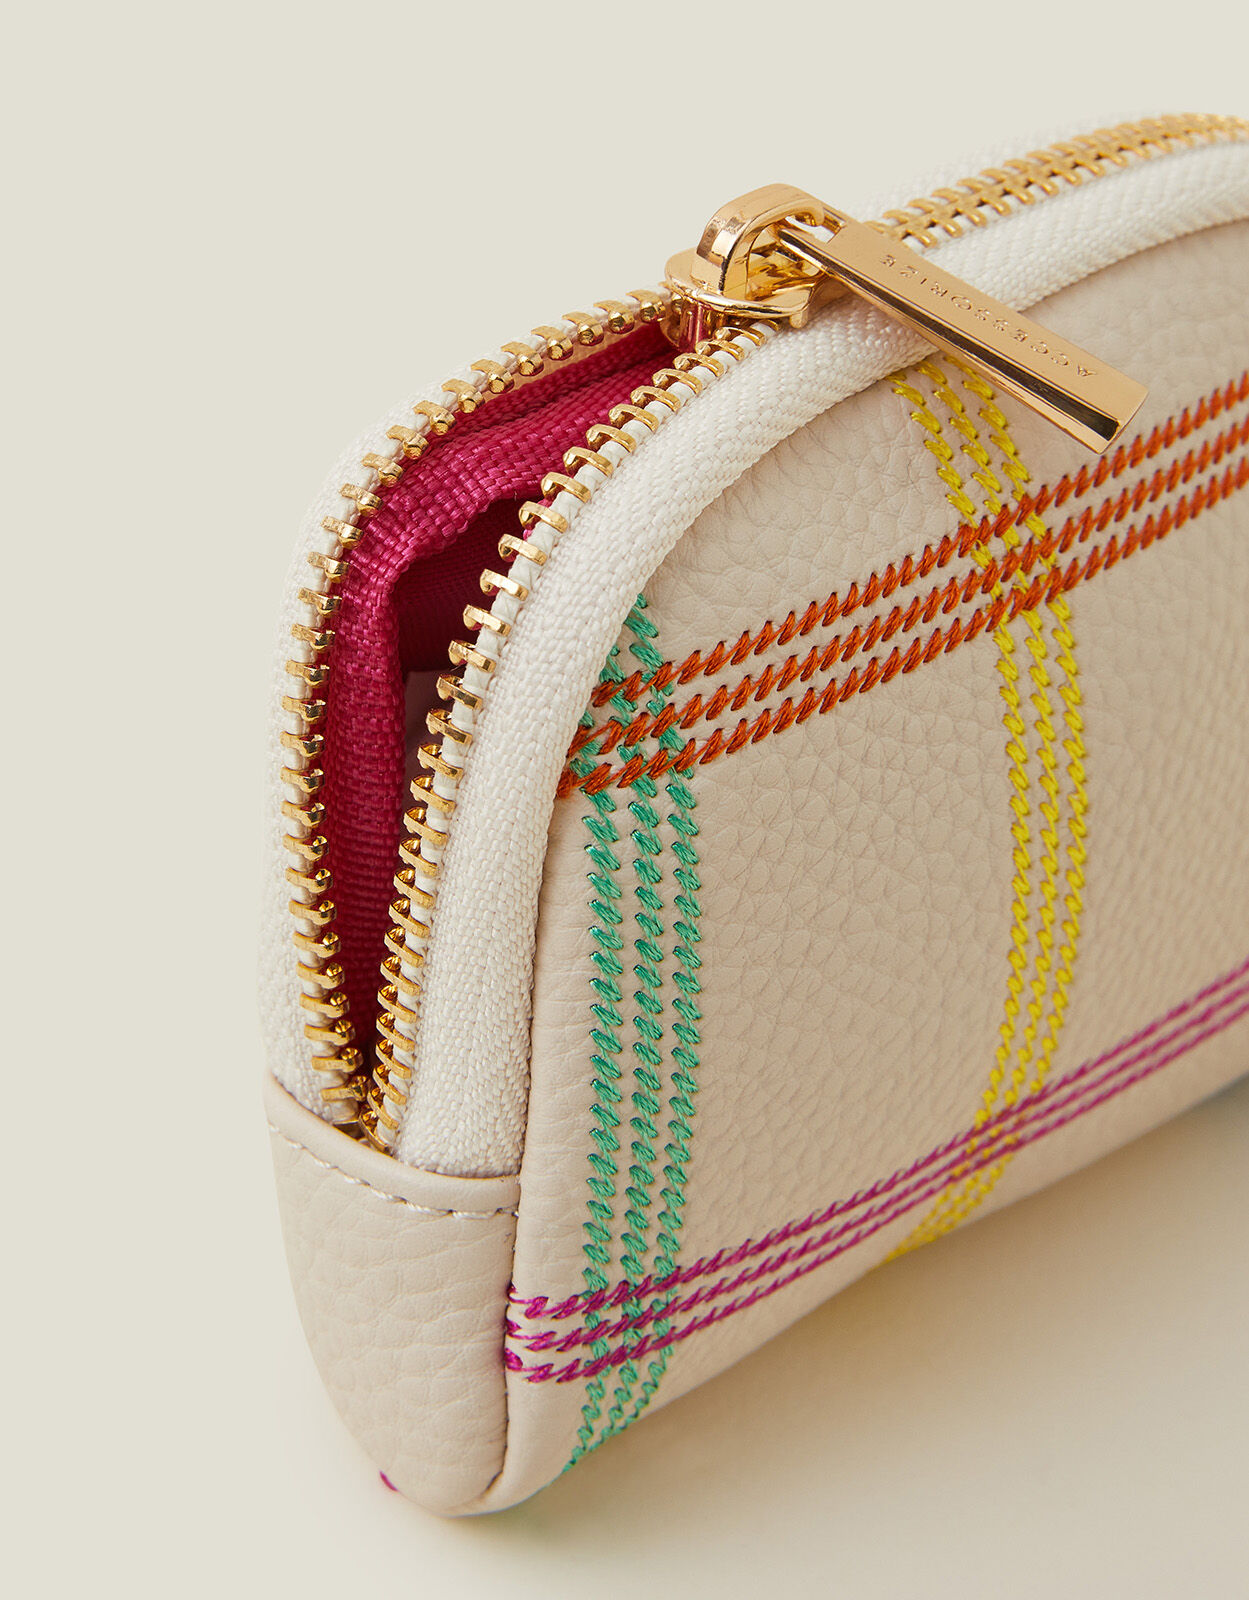 Shop for Burberry Handbags at Cruise Fashion.